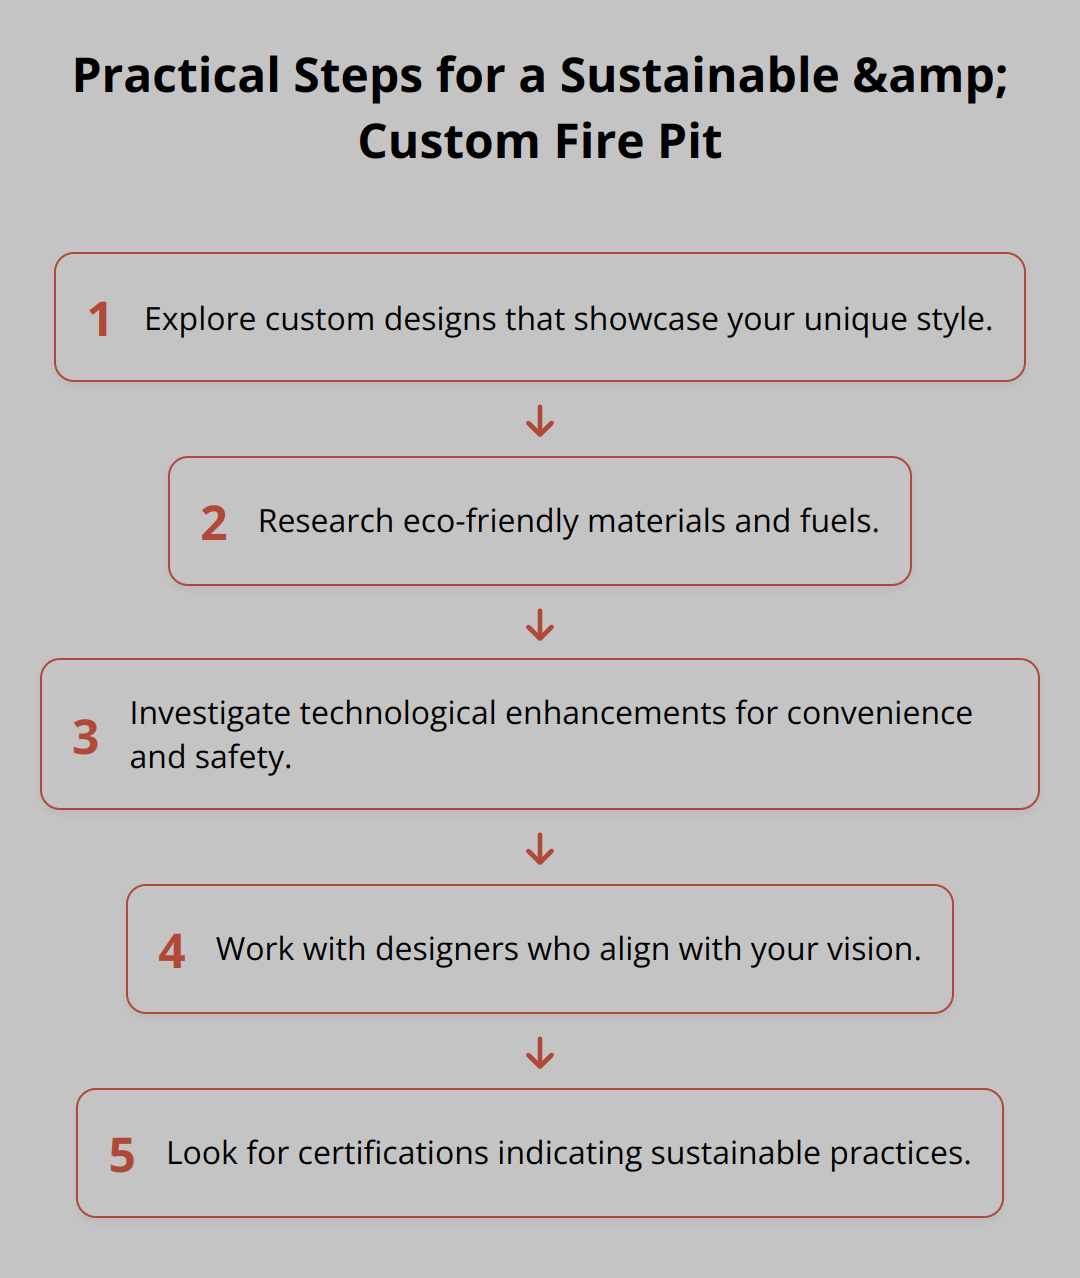 Flow Chart - Practical Steps for a Sustainable & Custom Fire Pit